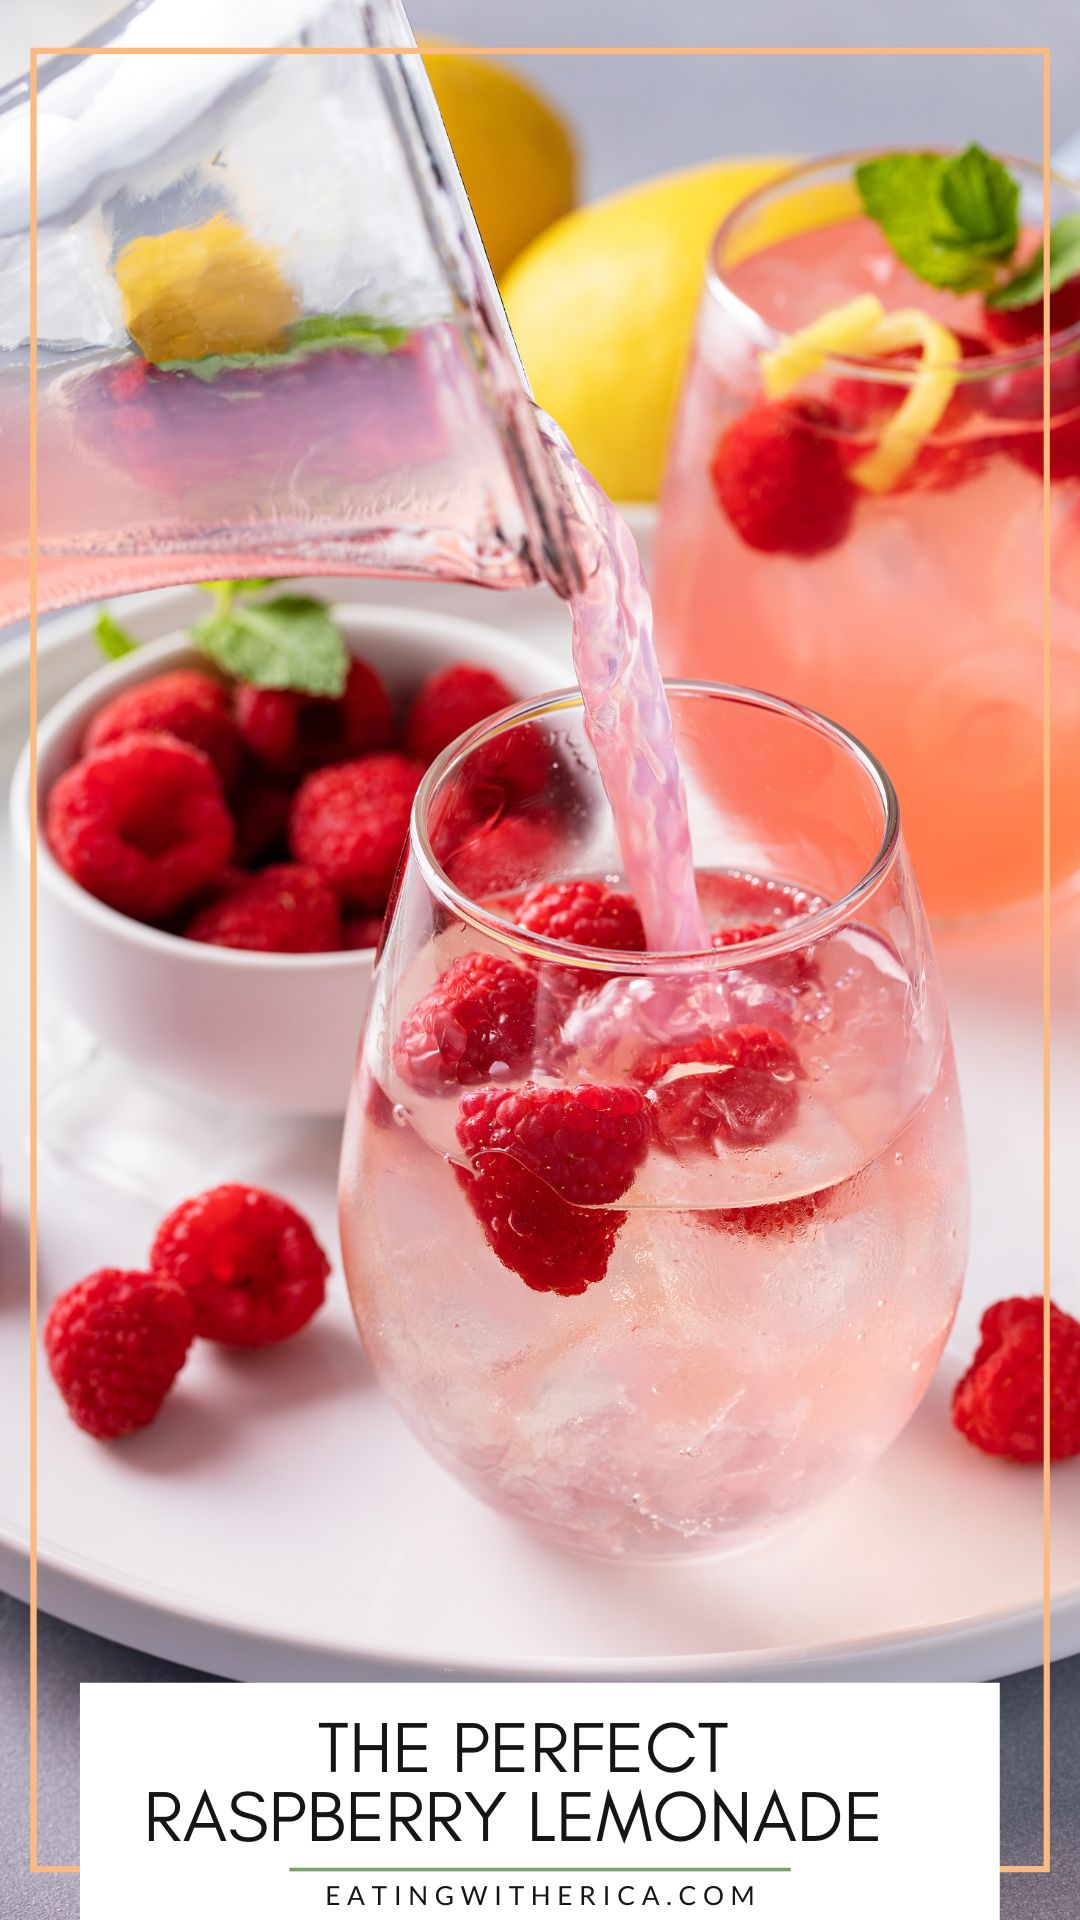 Looking for the perfect summer day drink recipe? You need to try this Delicious Raspberry Lemonade ASAP! CLICK HERE to make it today!